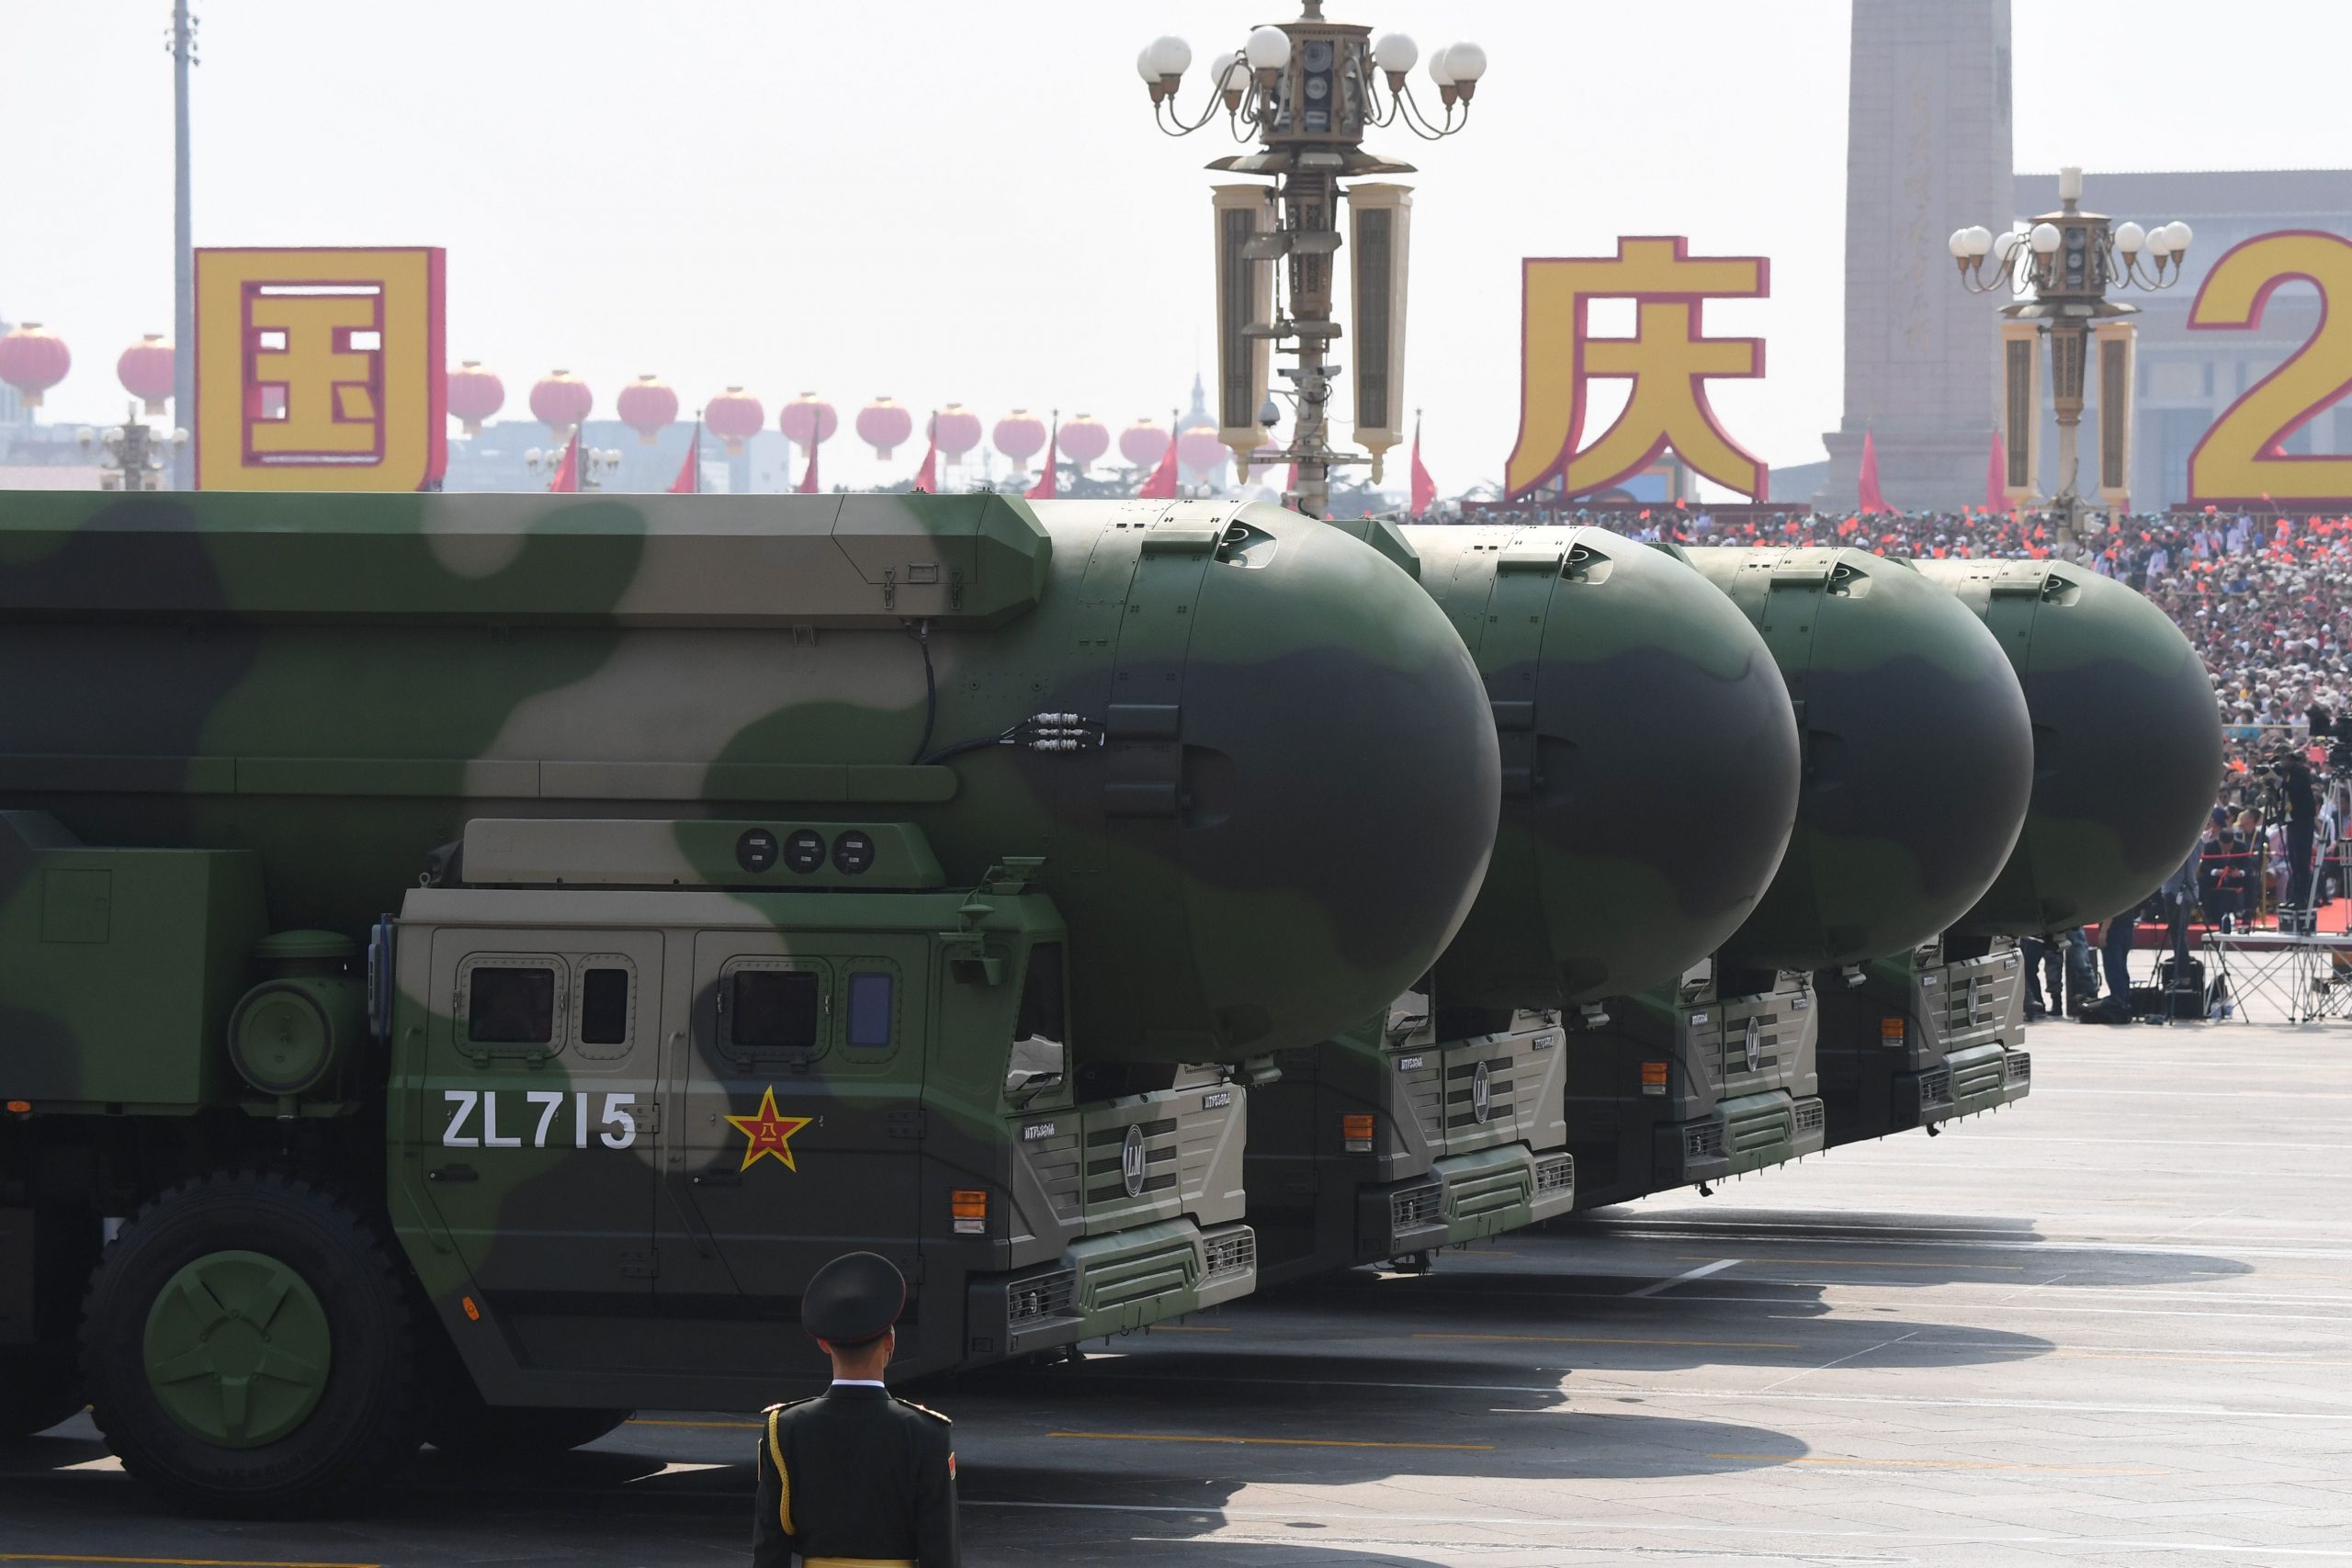 China's DF-41 nuclear-capable intercontinental ballistic missiles are seen during a military parade at Tiananmen Square in Beijing on October 1, 2019, to mark the 70th anniversary of the founding of the People's Republic of China.